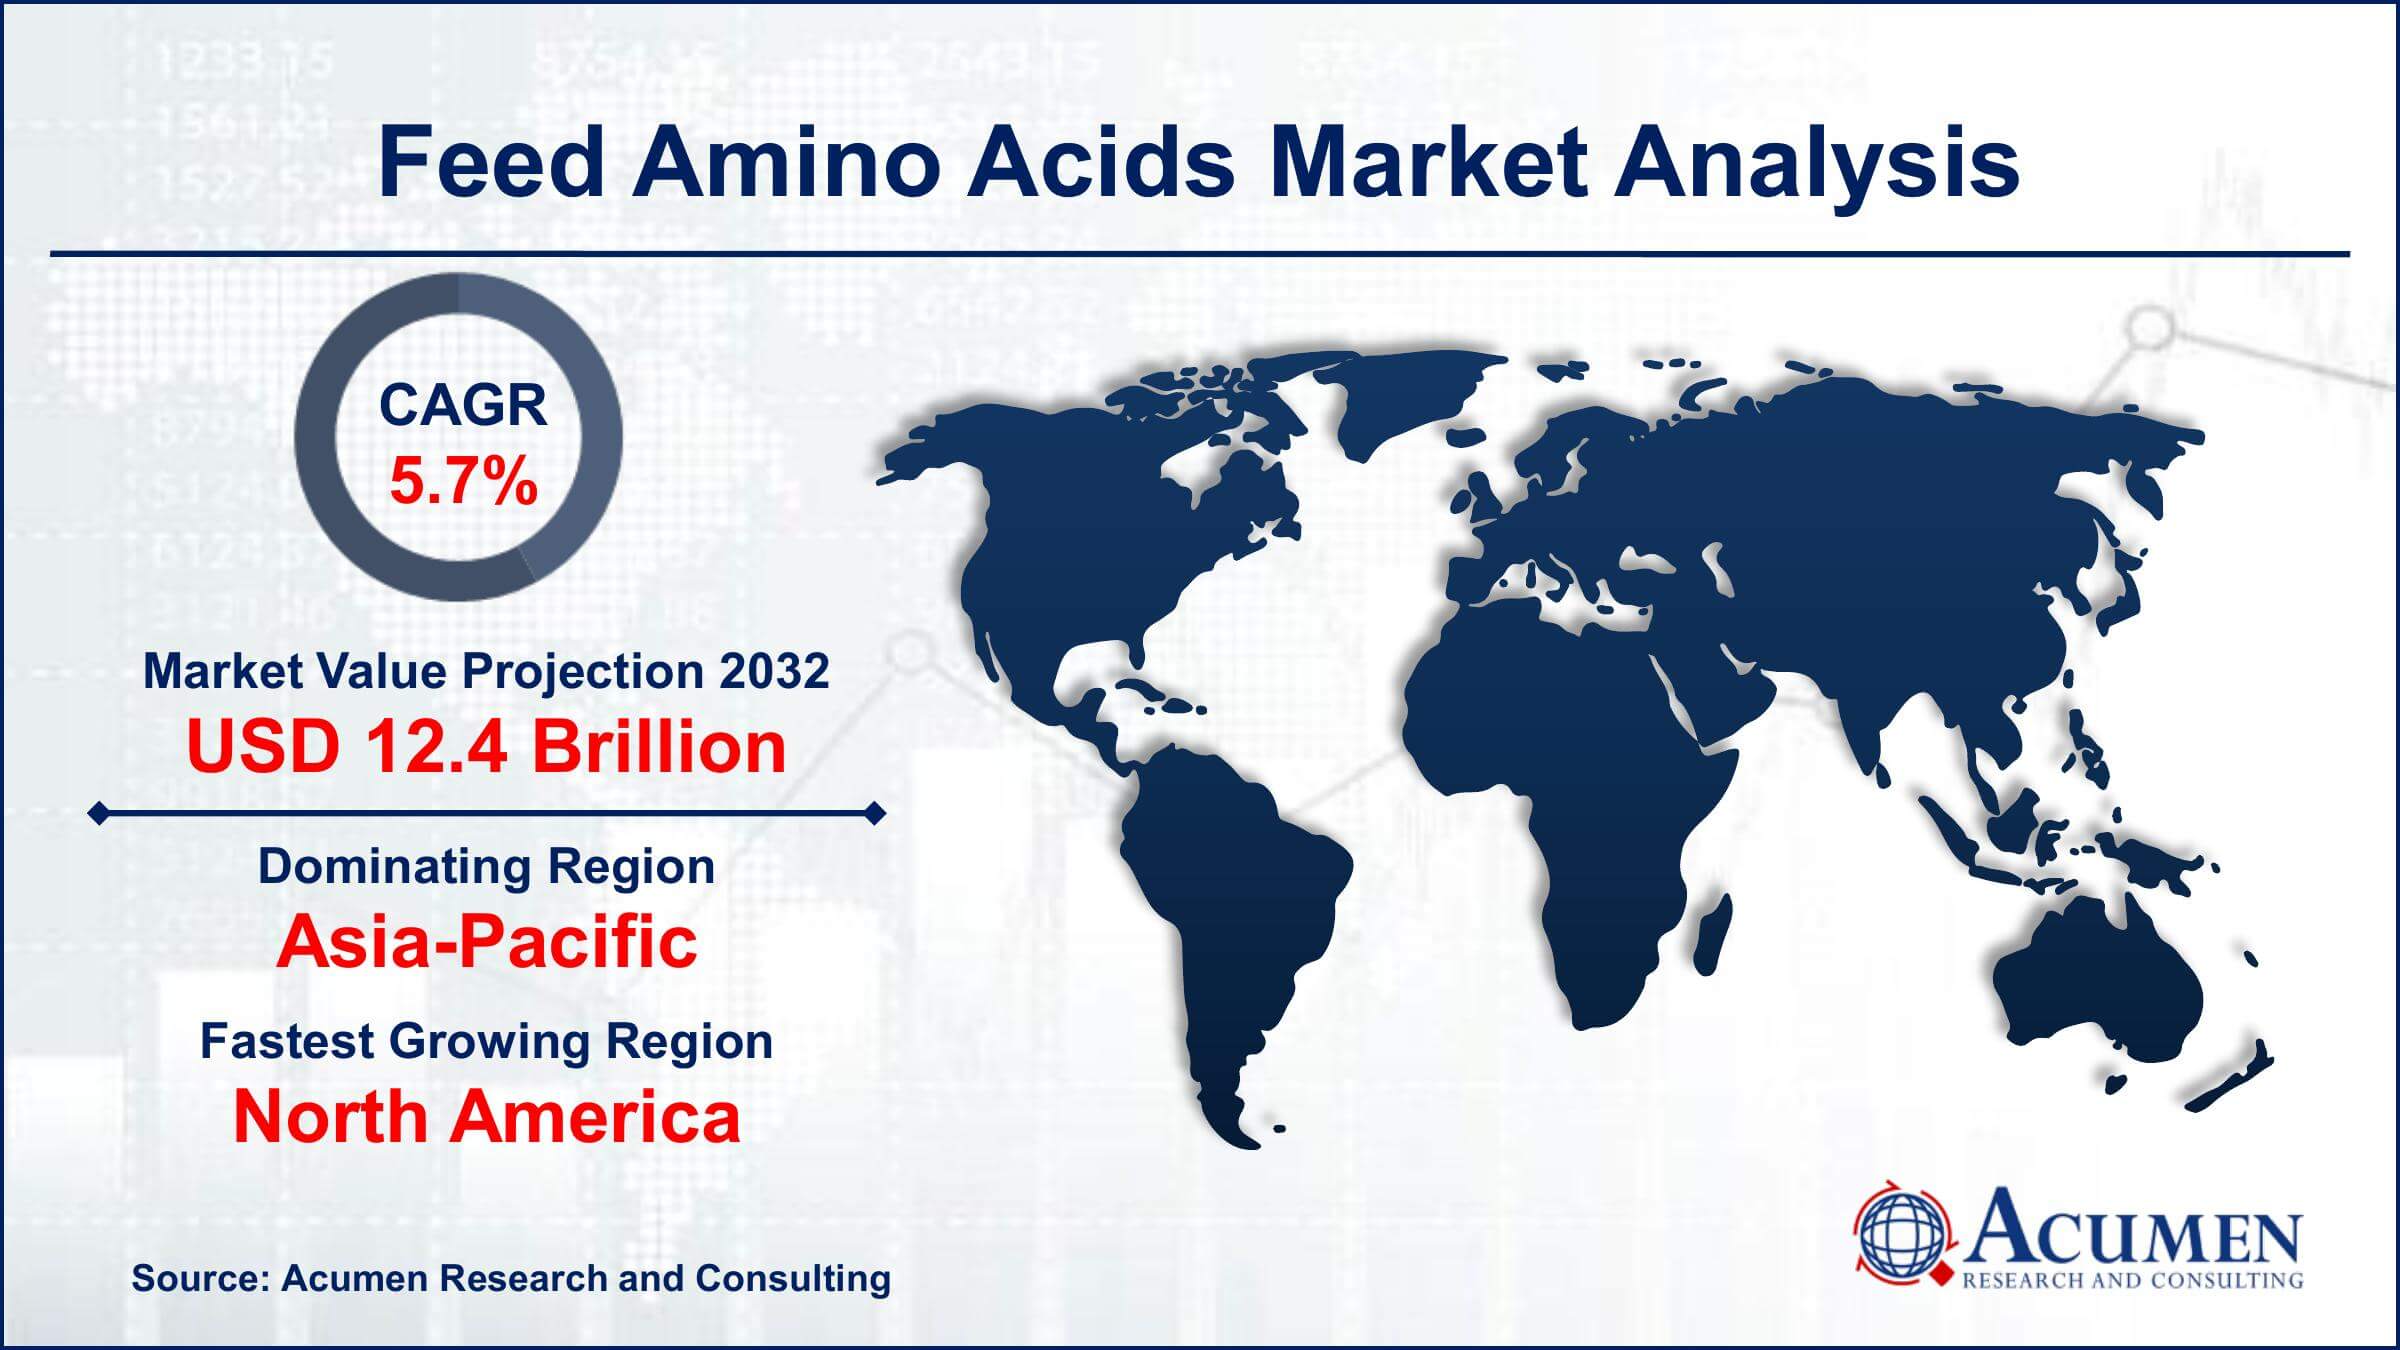 Global Feed Amino Acids Market Trends